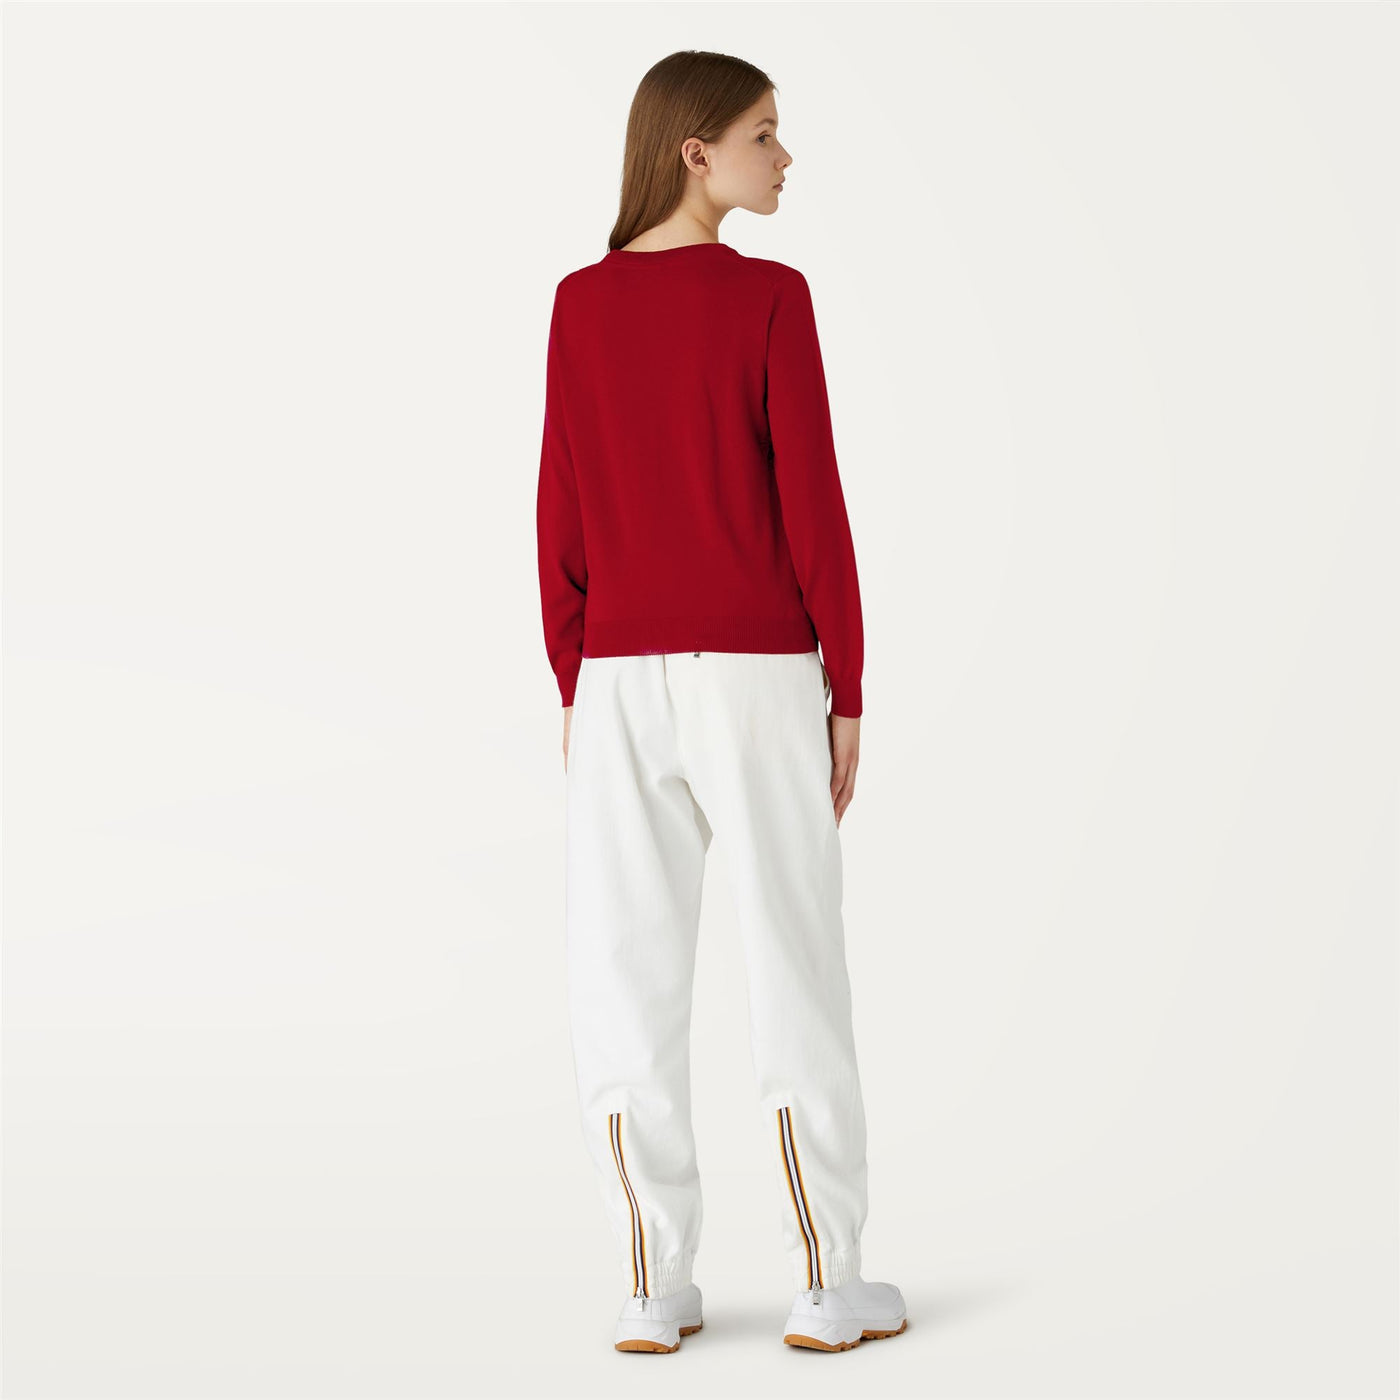 Knitwear Woman ABBI MERINO Pull  Over Red Dk | kway Dressed Front Double		